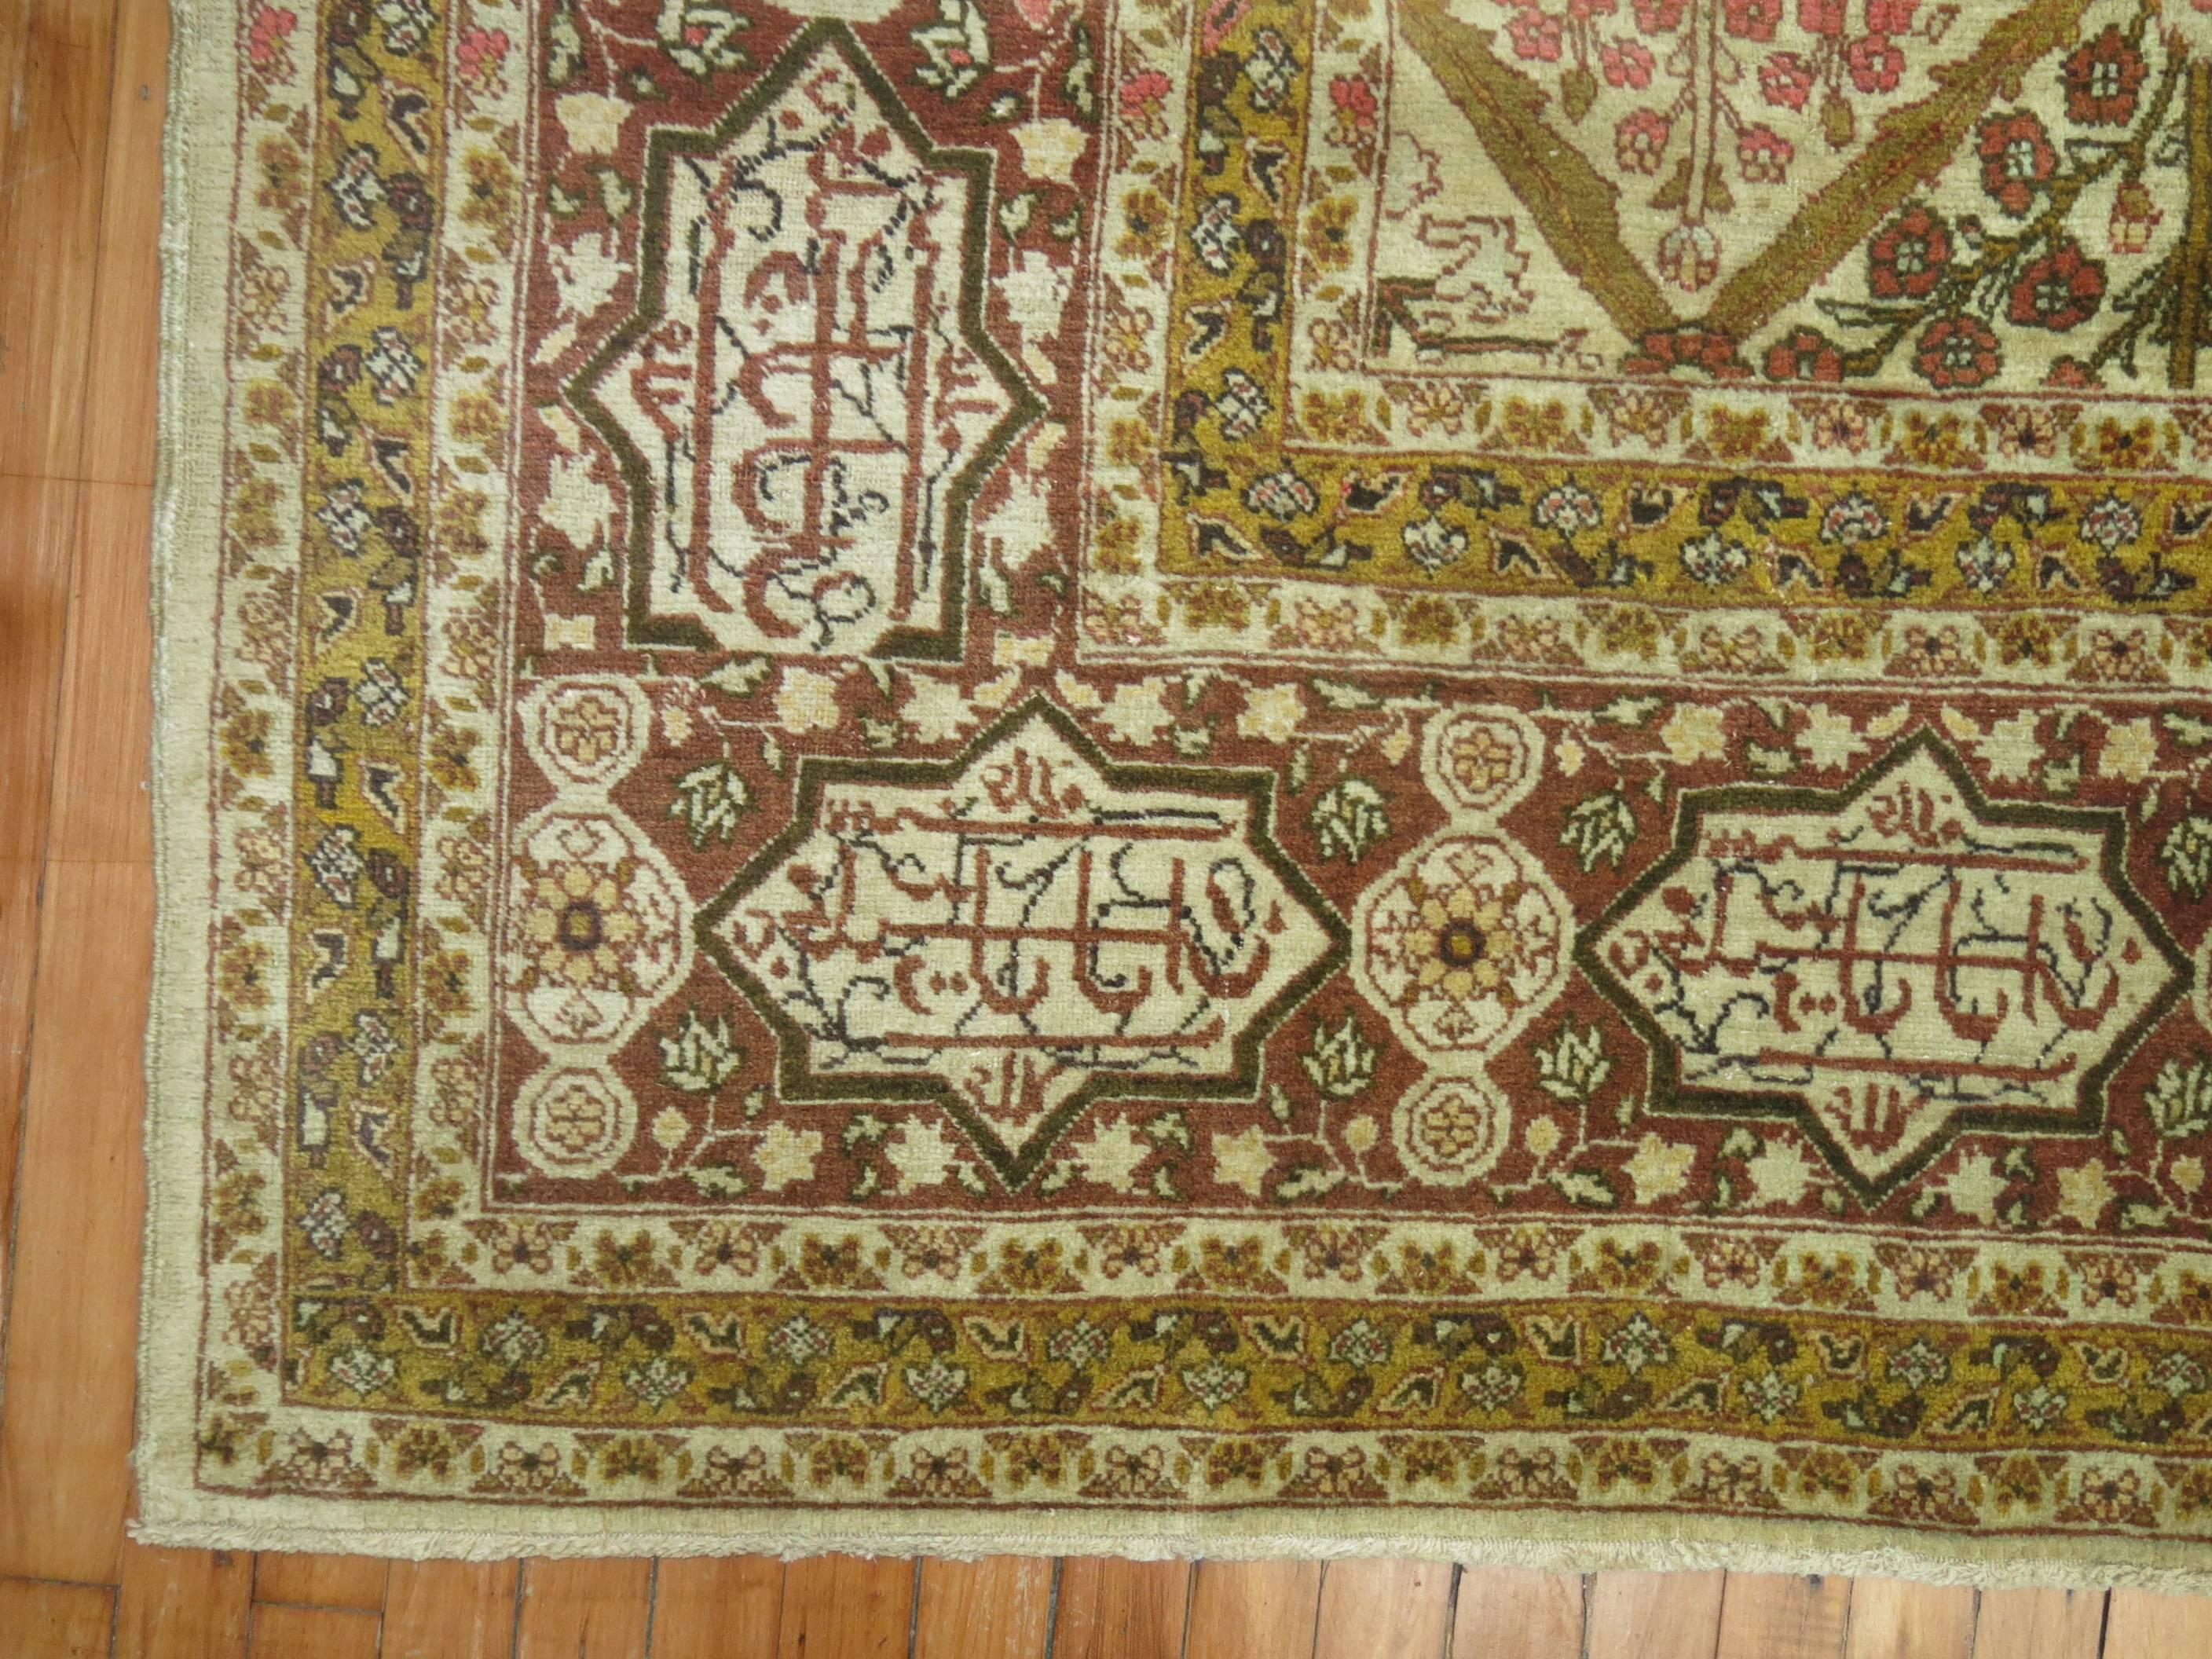 An early 20th century Persian Tabriz carpet with a garden design typically seen in persian bakhtiari carpets. The border has a Persian love poem in-scripted too. The weaver was quite an artisan.

Measures: 8'8'' x 12'1''.